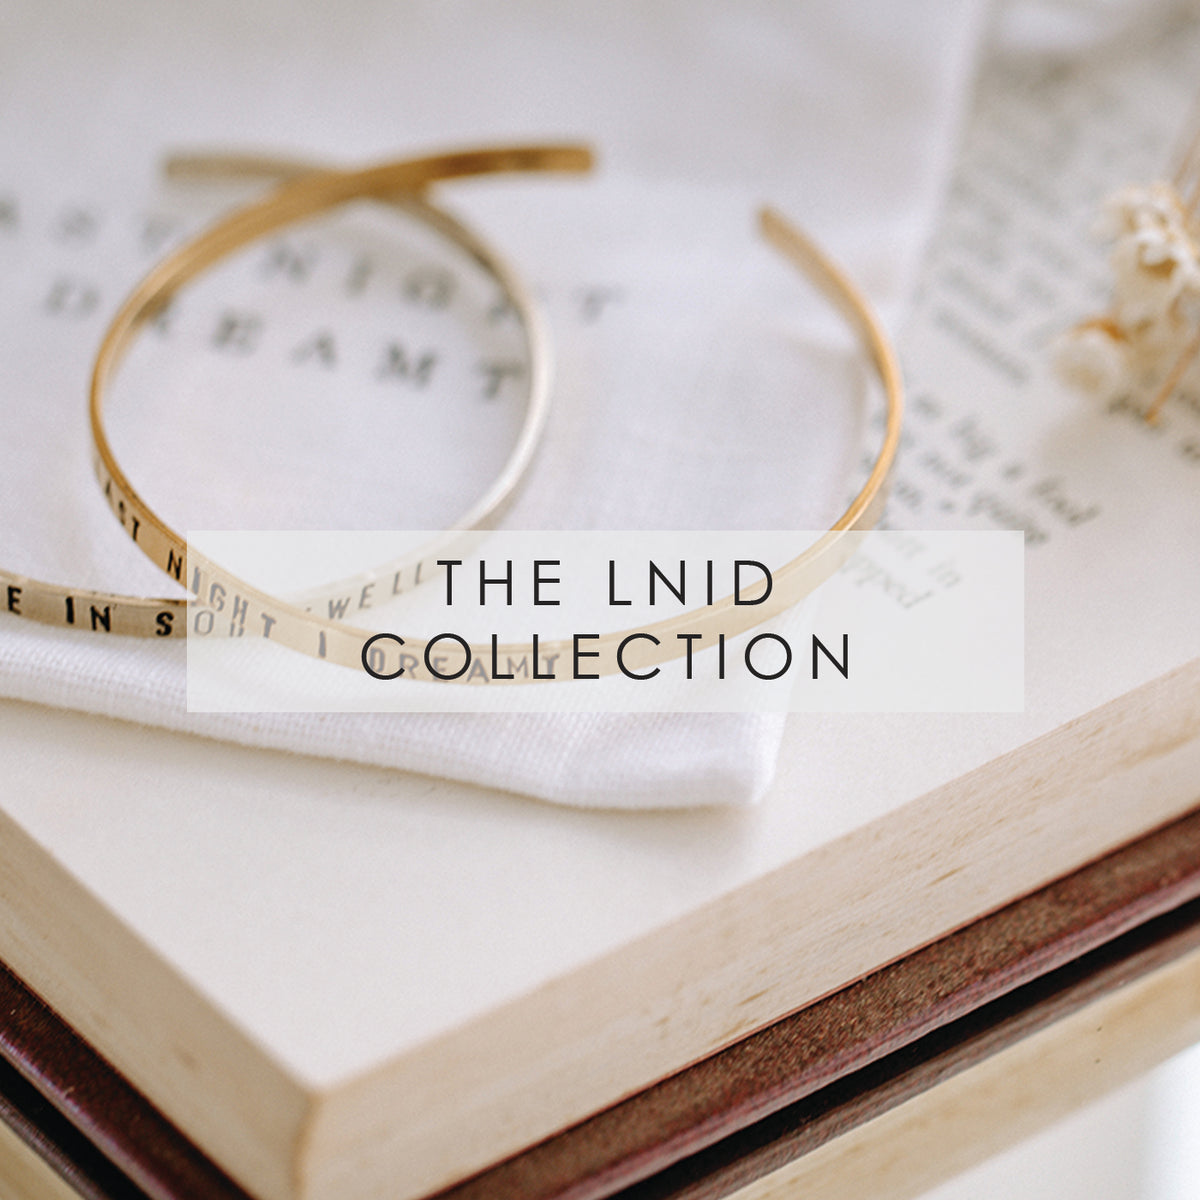 LNID COLLECTION.jpg__PID:b6ef51a8-34aa-4250-adc4-30847f98a489